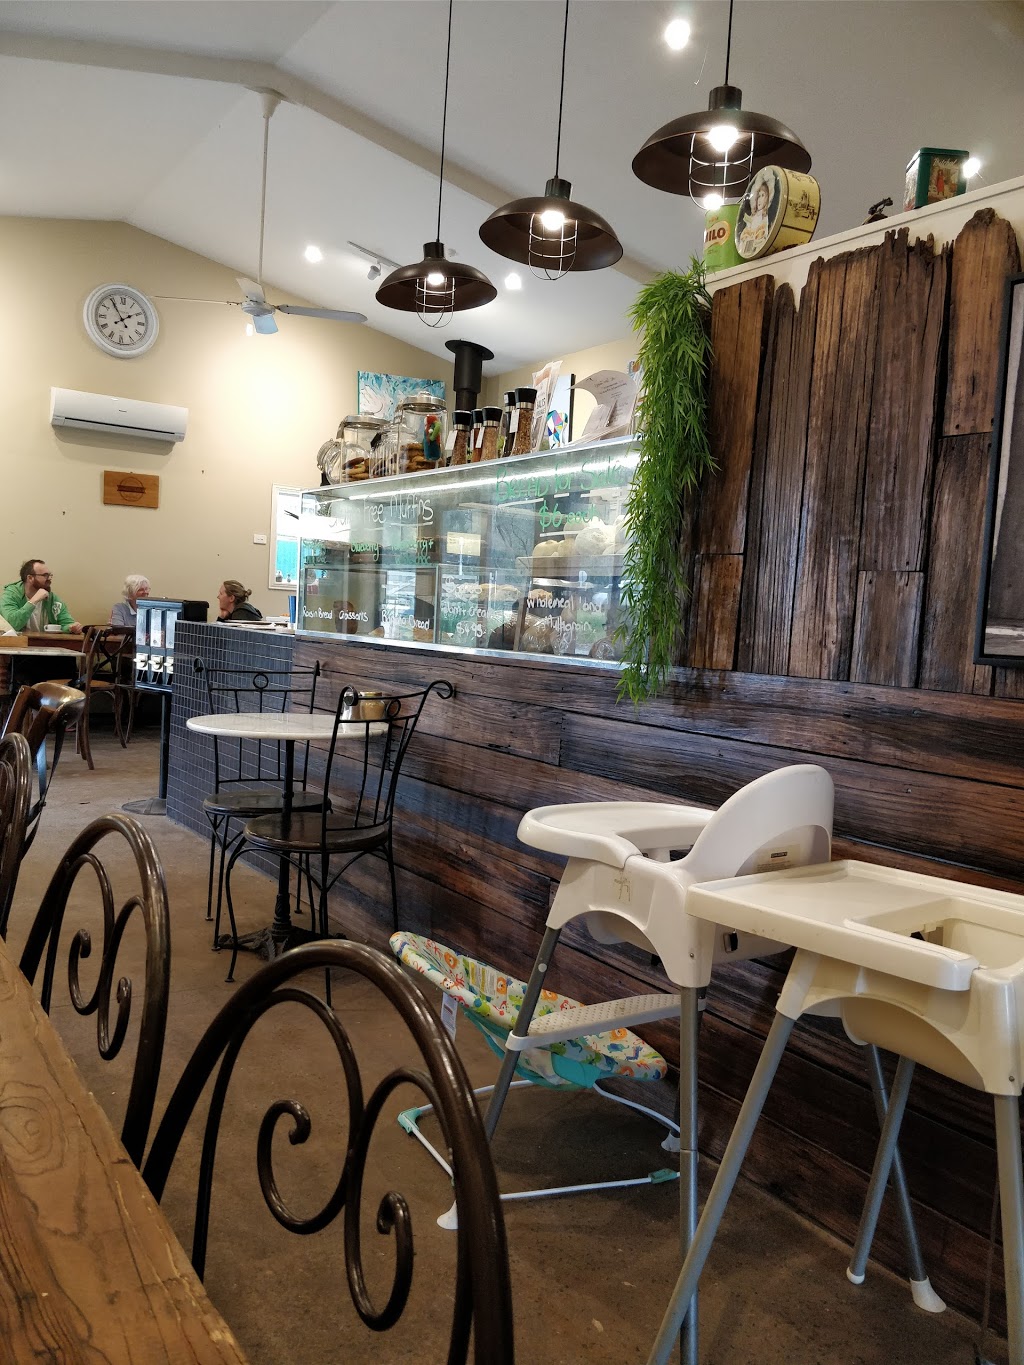 The Trail Cafe | cafe | 1/4 Clancys Rd, Mount Evelyn VIC 3796, Australia | 0397363636 OR +61 3 9736 3636